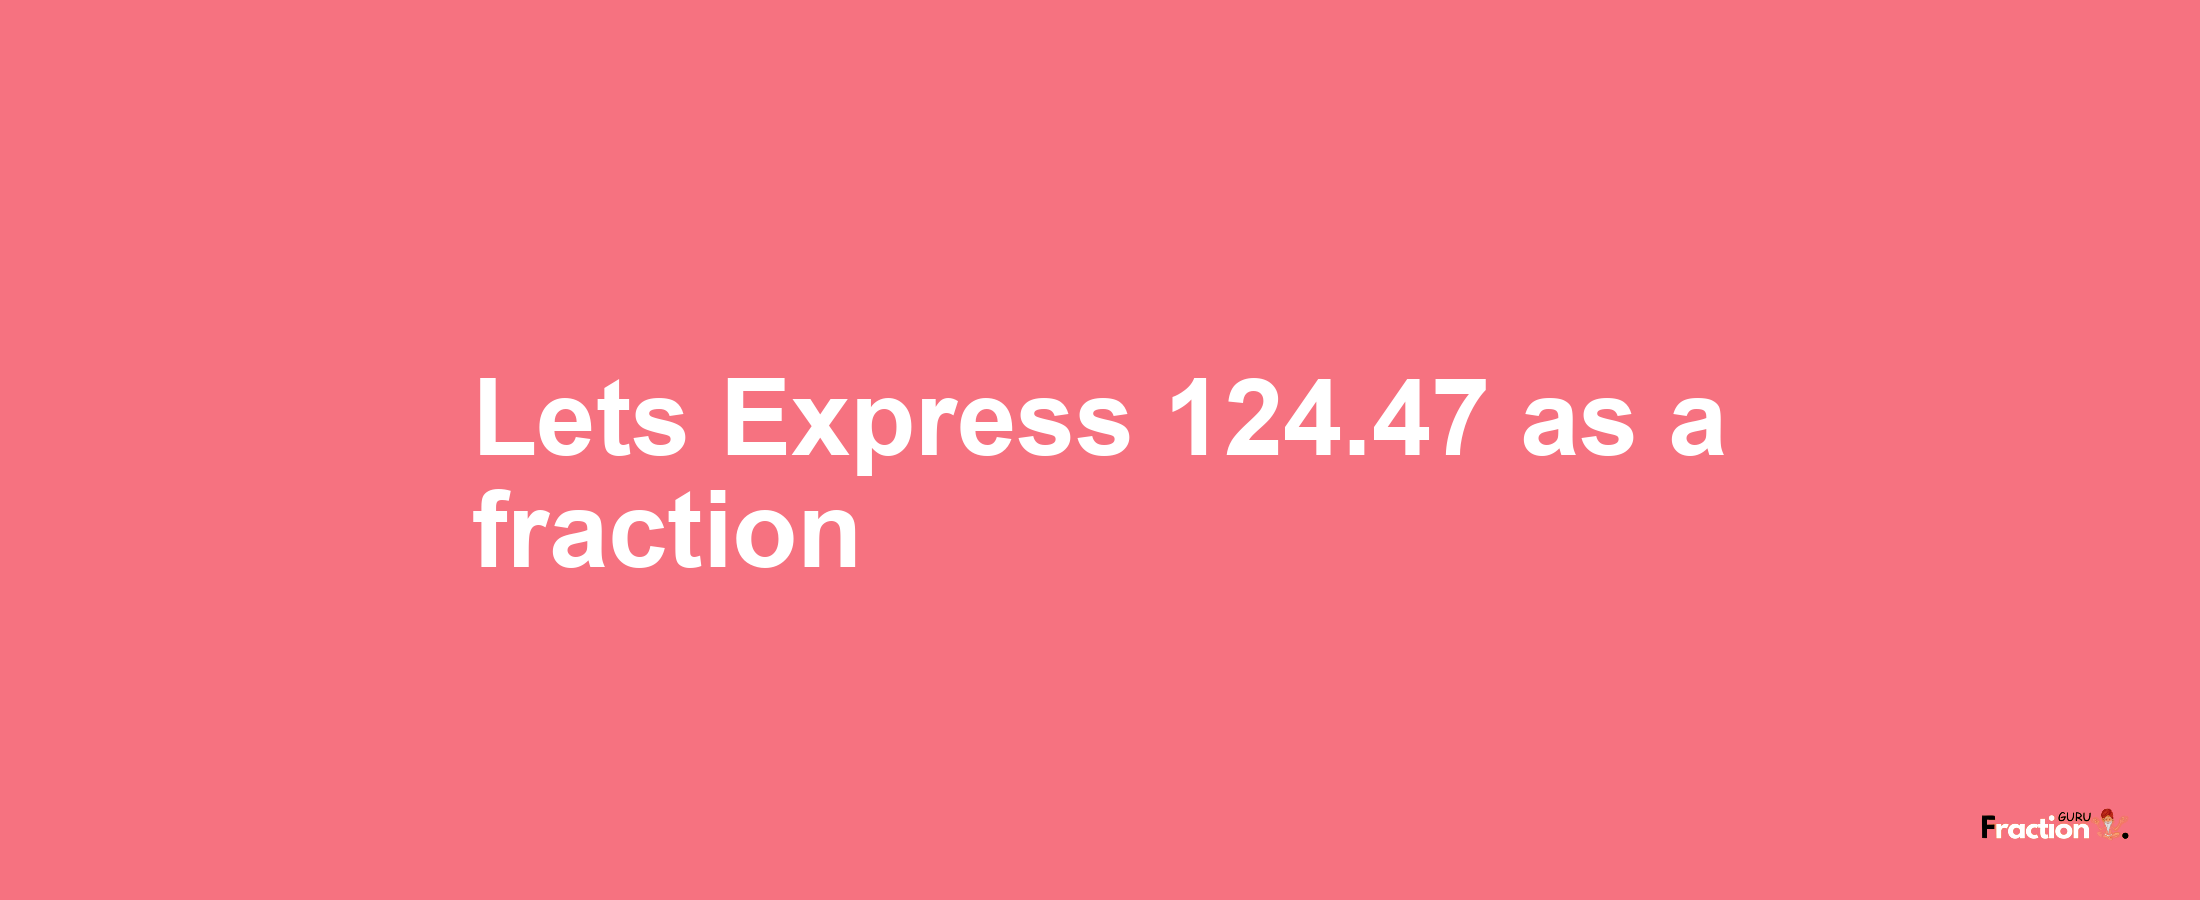 Lets Express 124.47 as afraction